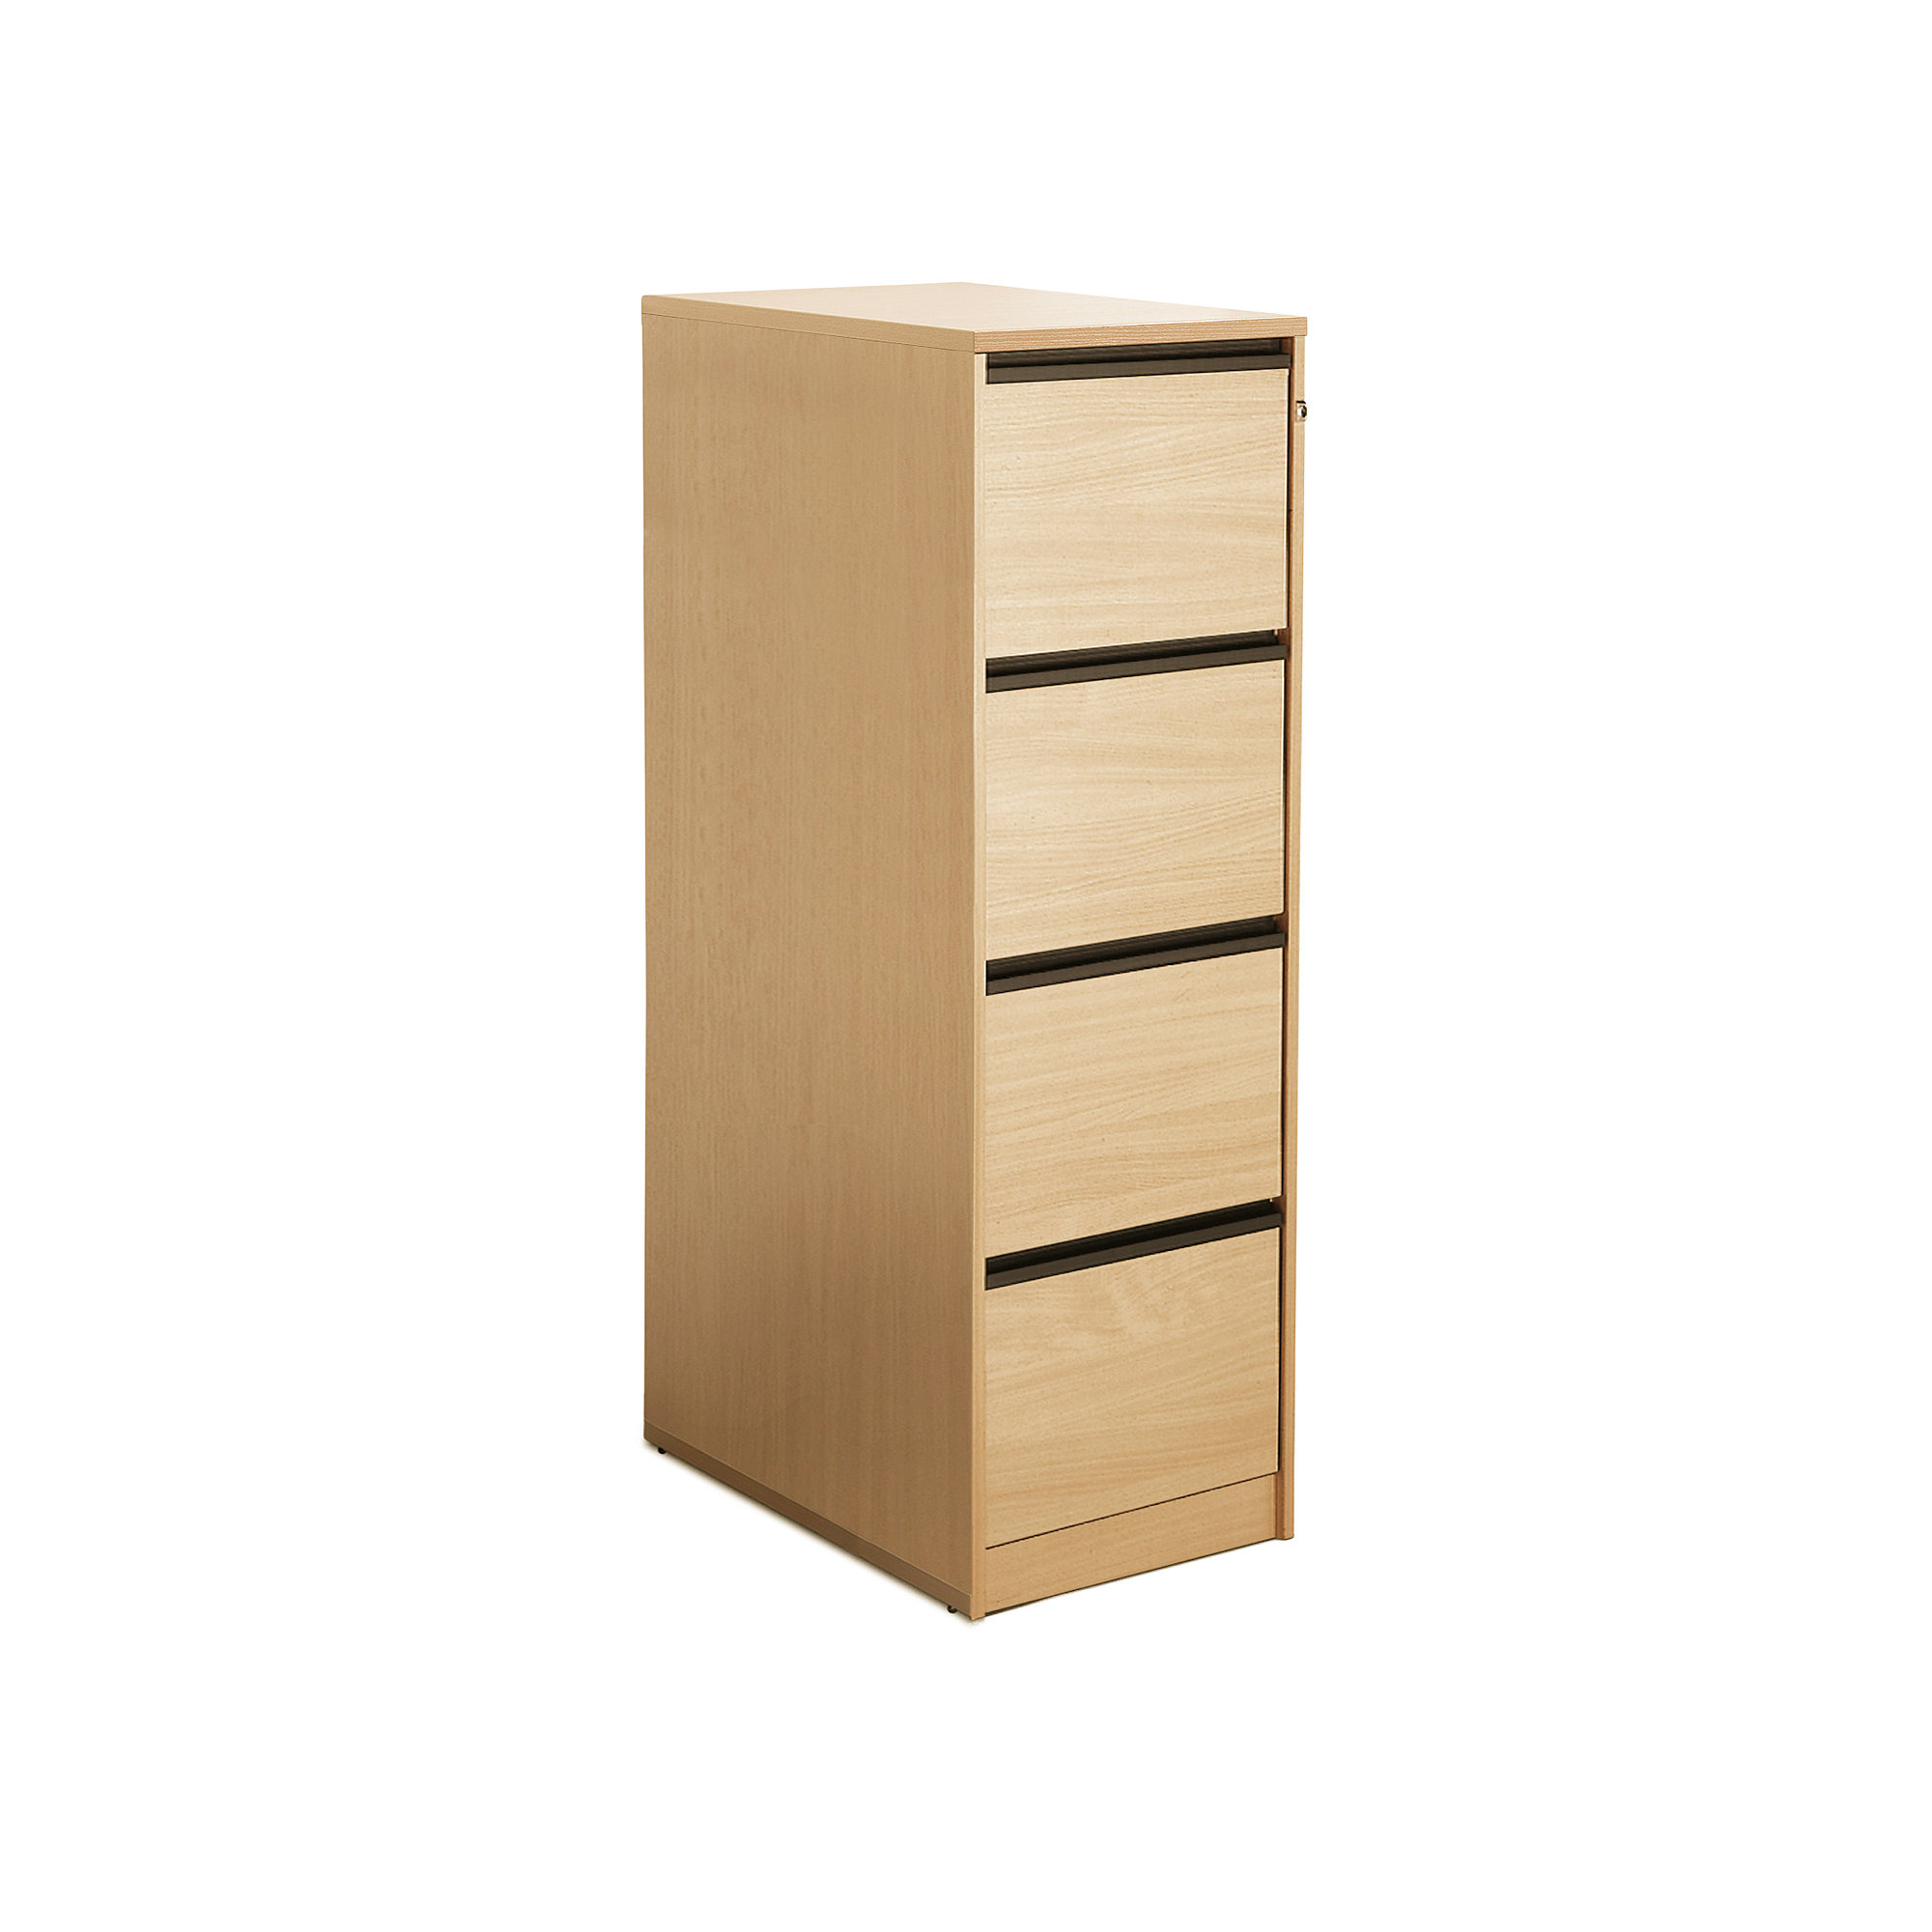 Wooden Foolscap Filing Cabinet 4 Drawers Oak Aj Products Ireland intended for size 2000 X 2000